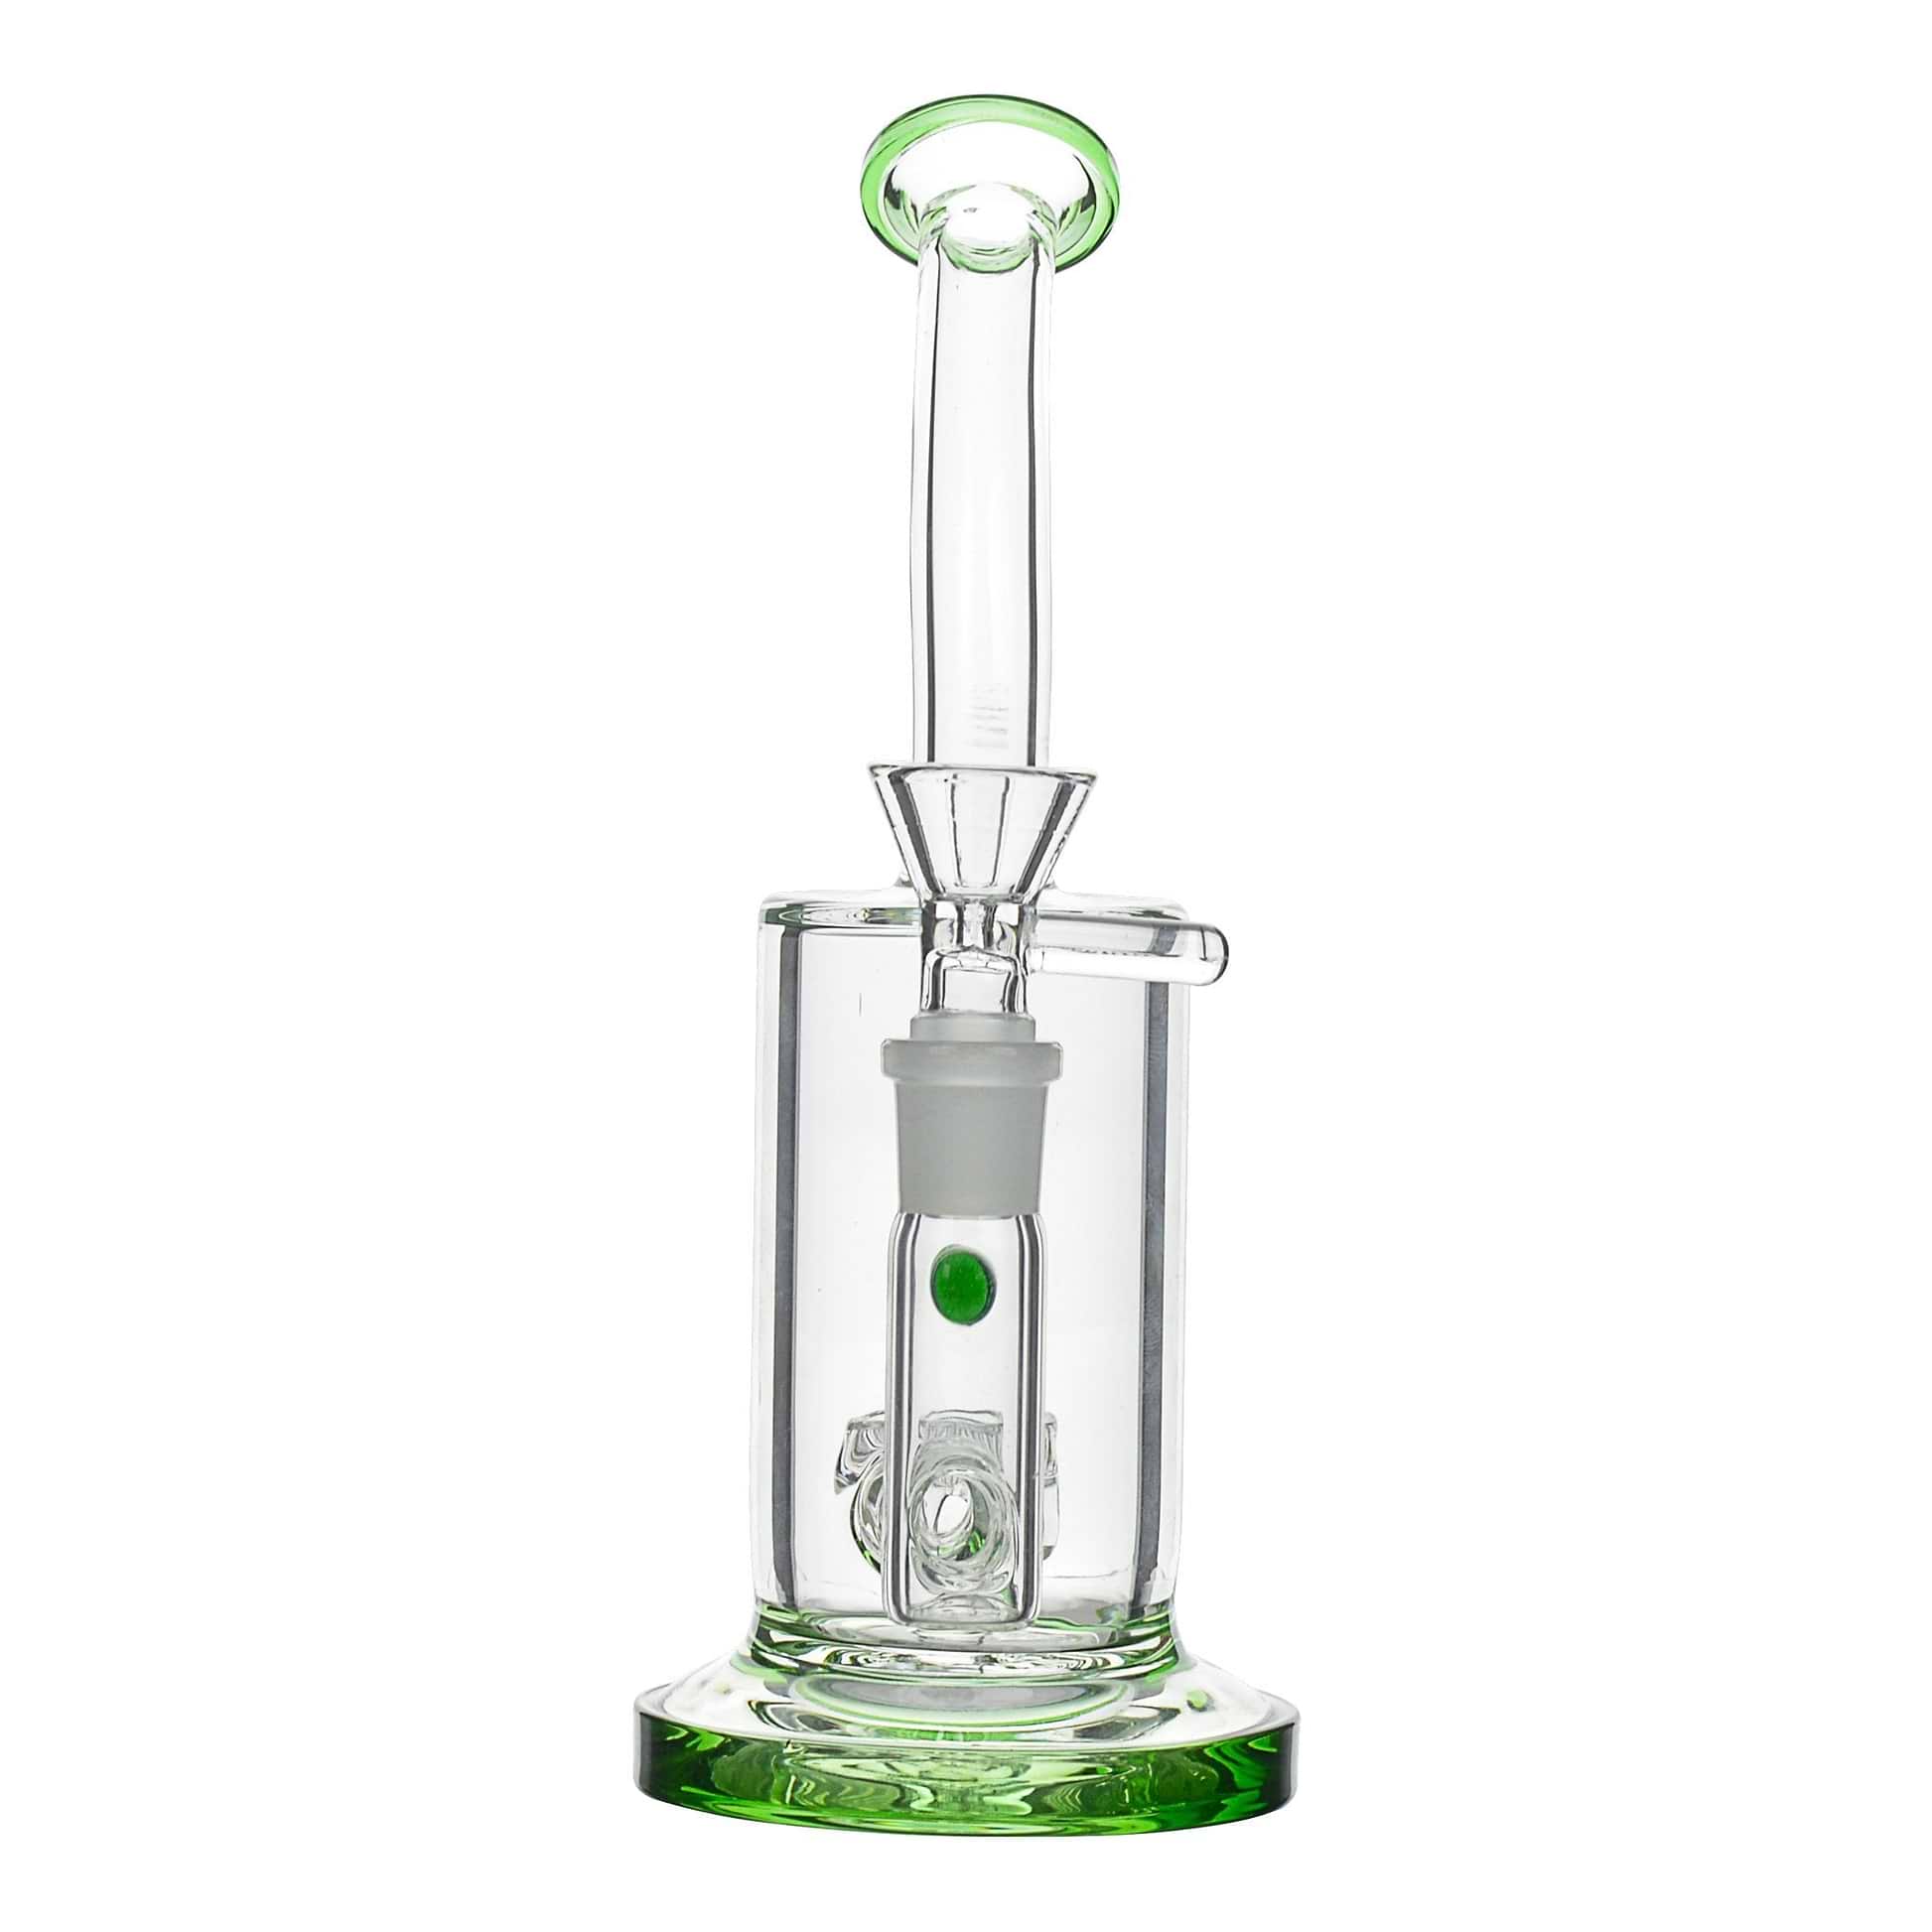 Green 8-inch glass bong smoking device with honeycomb perc angled mouthpiece